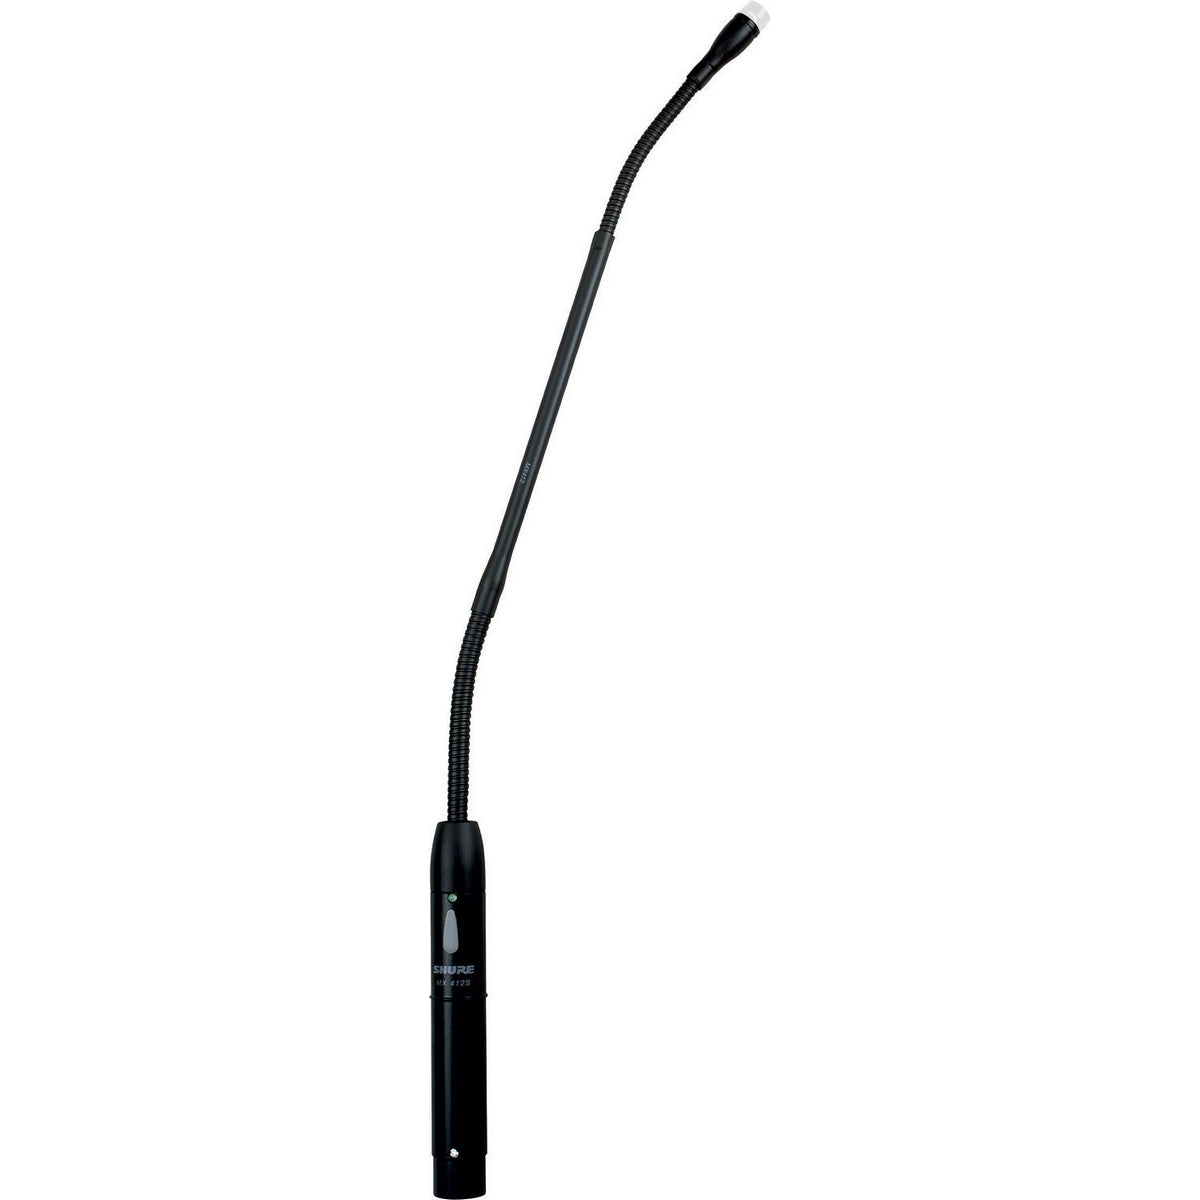 Shure MX418S/N | 18 inch Cardioid Gooseneck with Switch (no microphone cartridge)